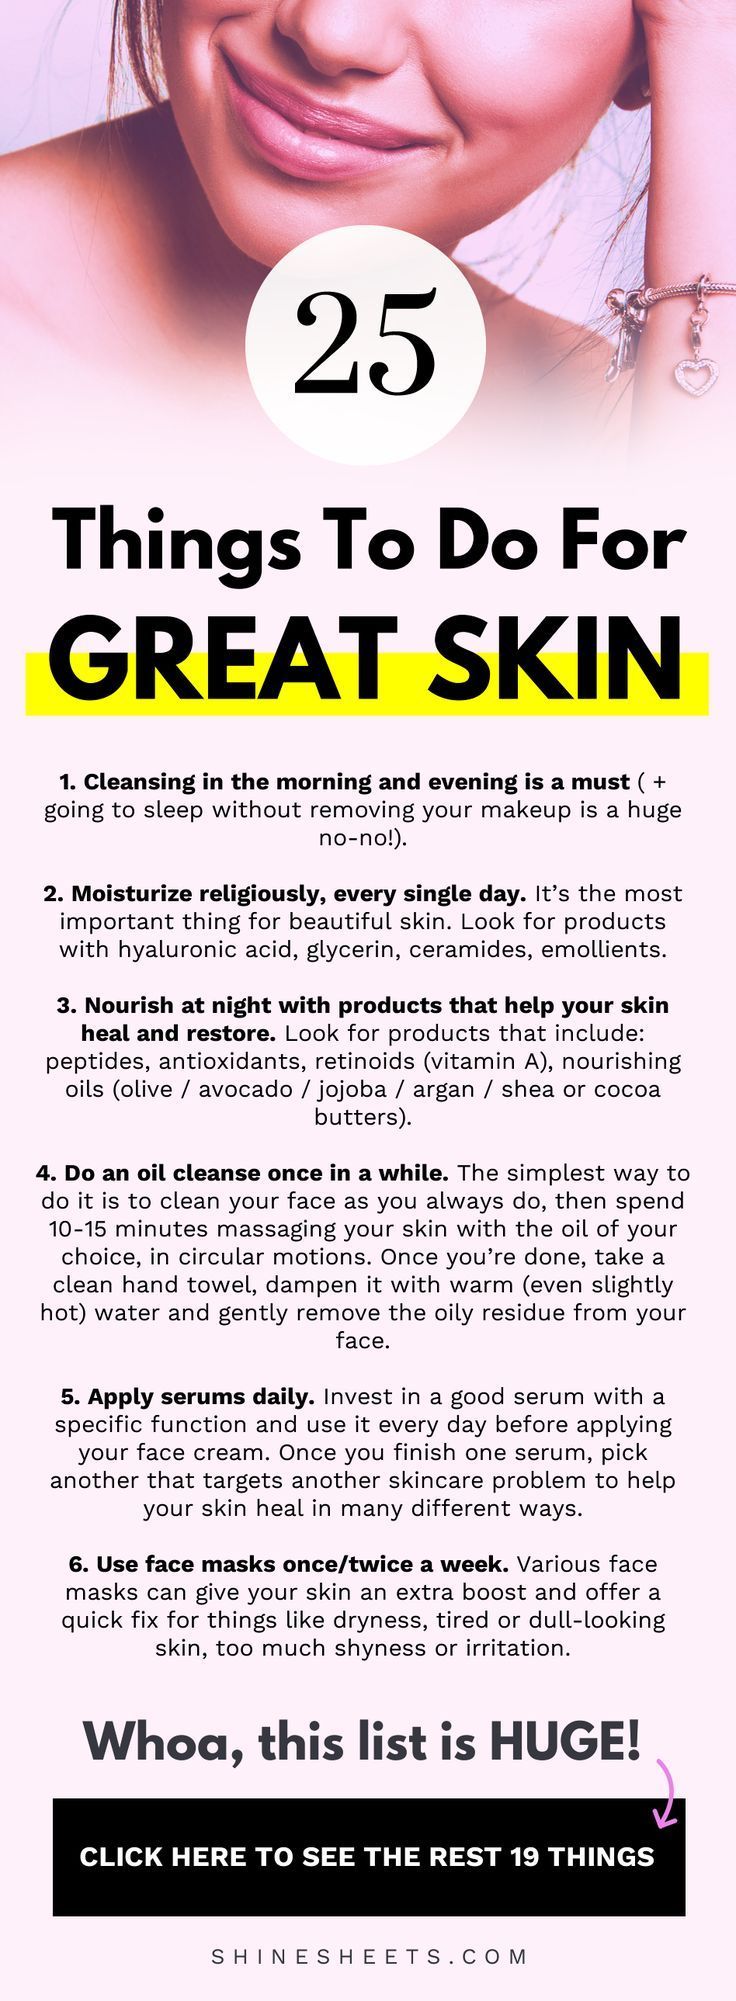 25 Things To Do For Stunning Skin - 25 Things To Do For Stunning Skin -   17 how to get beauty Skin ideas